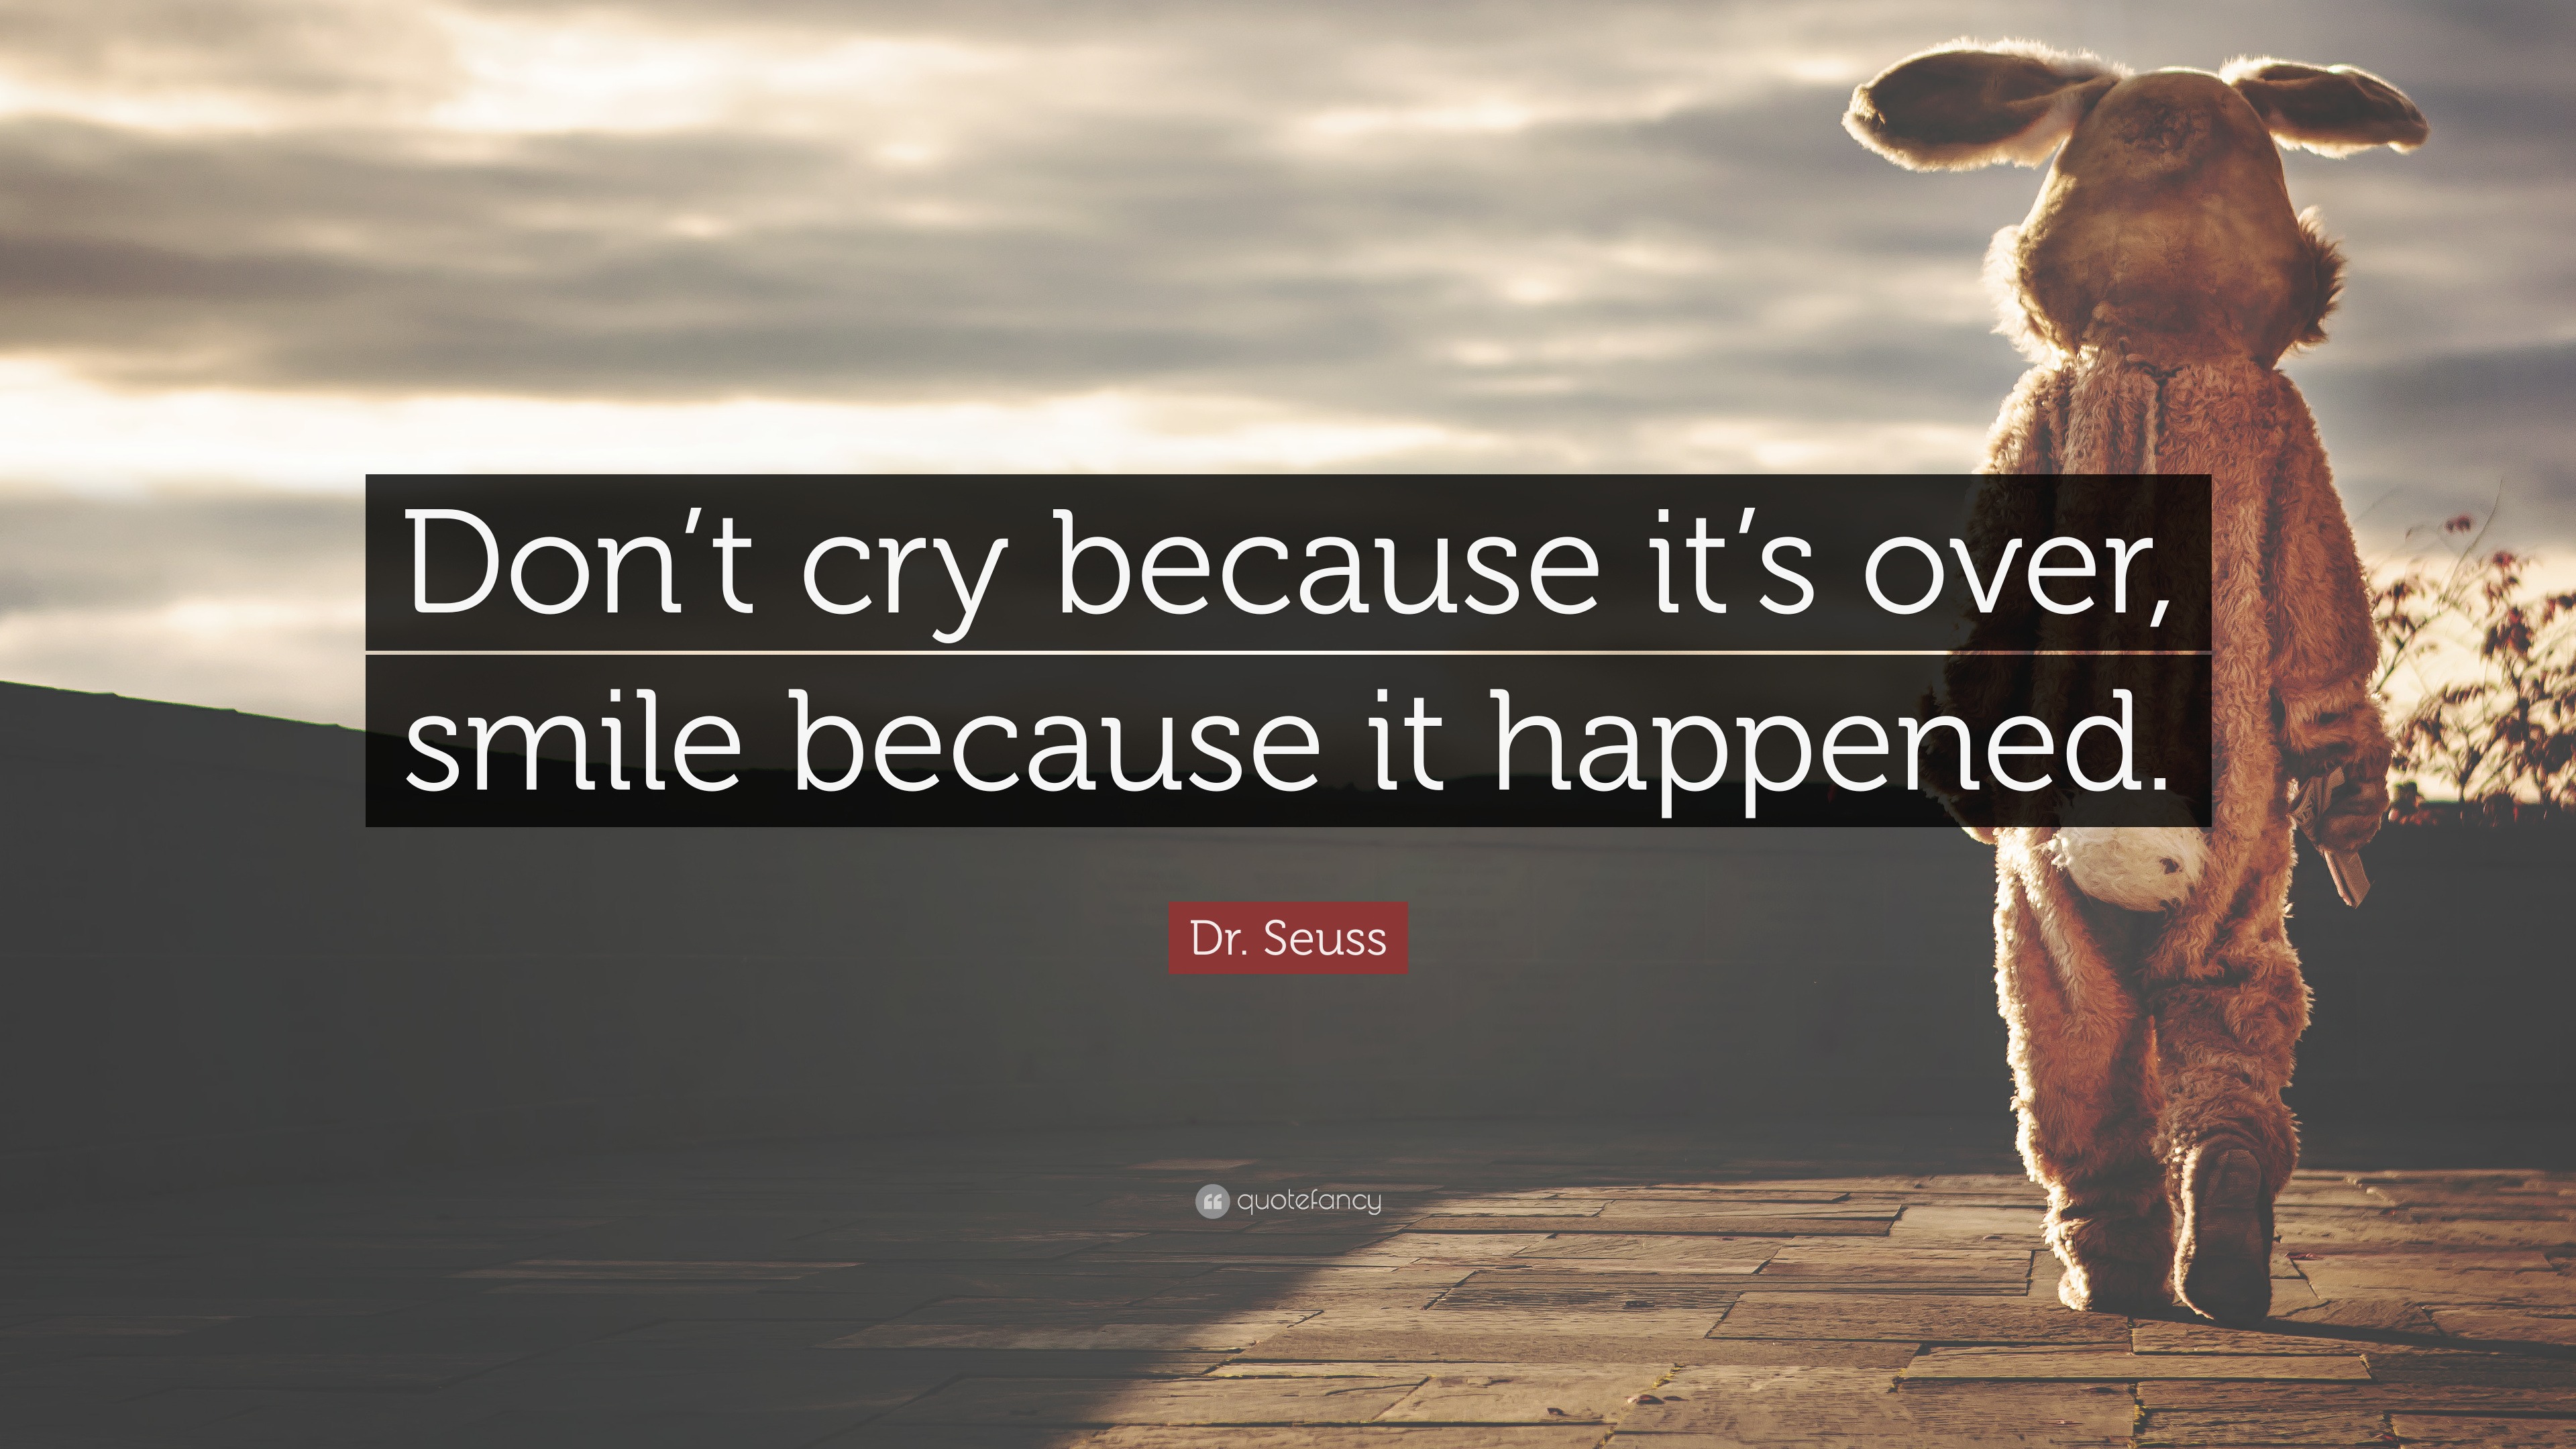 6361222-Dr-Seuss-Quote-Don-t-cry-because